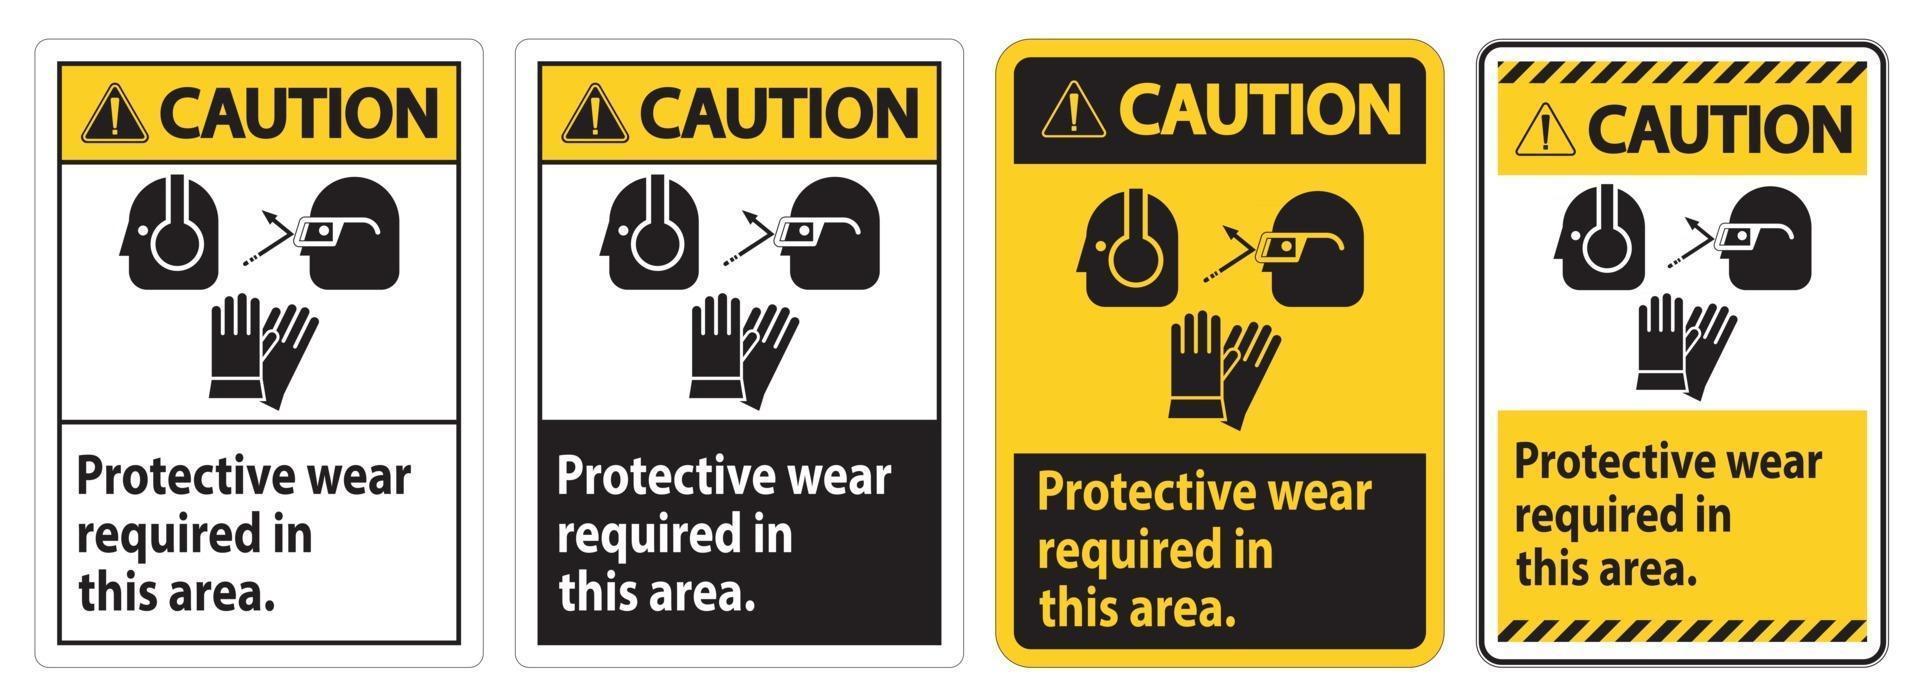 Caution Sign Wear Protective Equipment In This Area With PPE Symbols vector